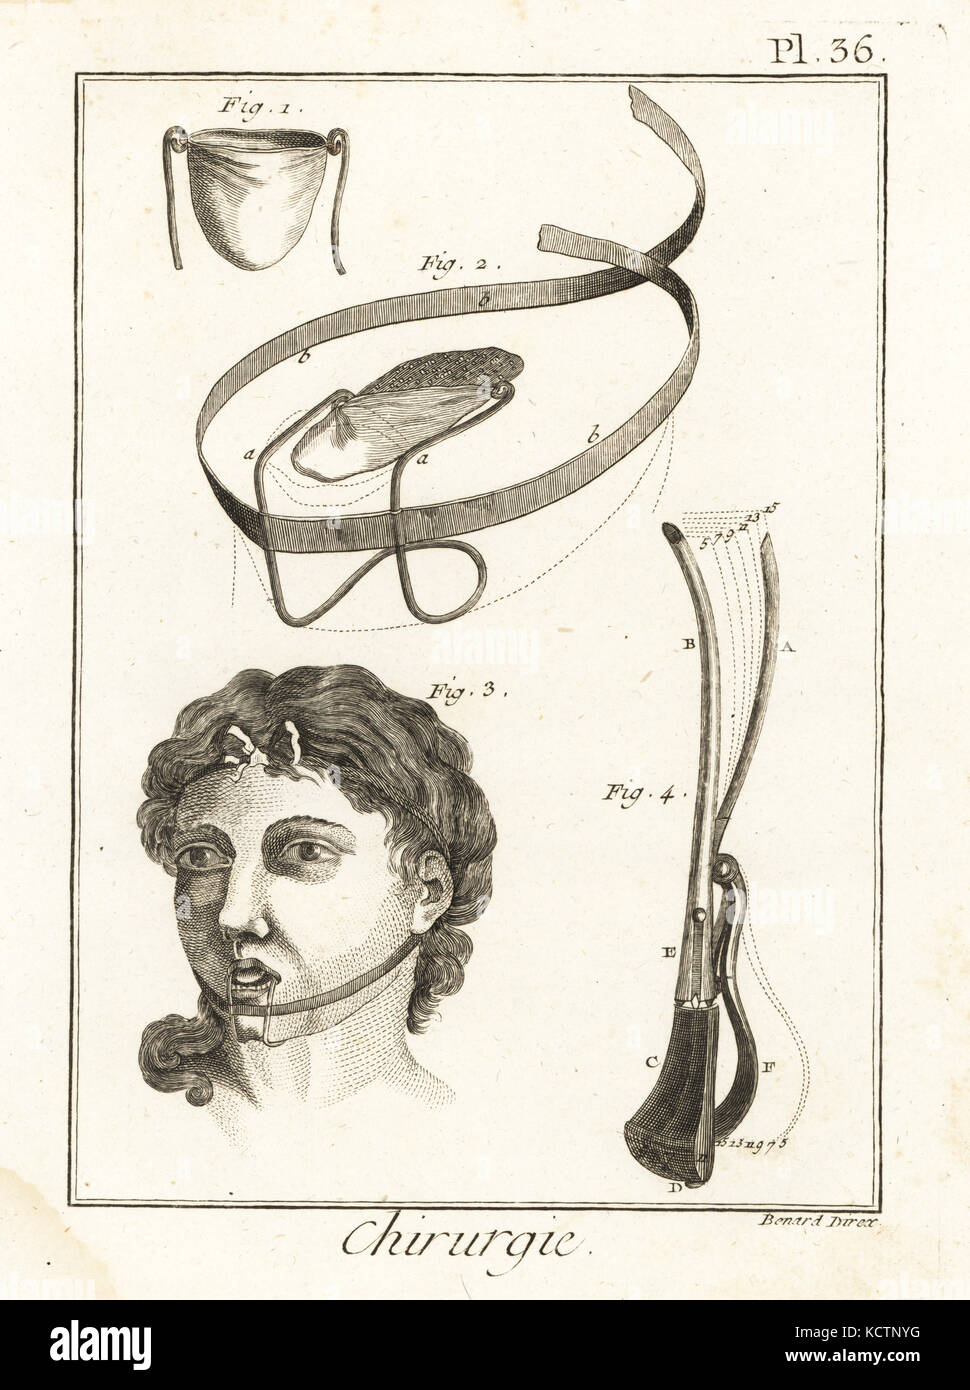 Doctor Pibrac's bandage for a tongue injury 1,2, the tongue bandage in place 3, and a lithotome, an instrument used to cut the bladder 4. Copperplate engraving by Robert Benard from Denis Diderot's Encyclopedia, Pellet, Geneva, 1779. Stock Photo